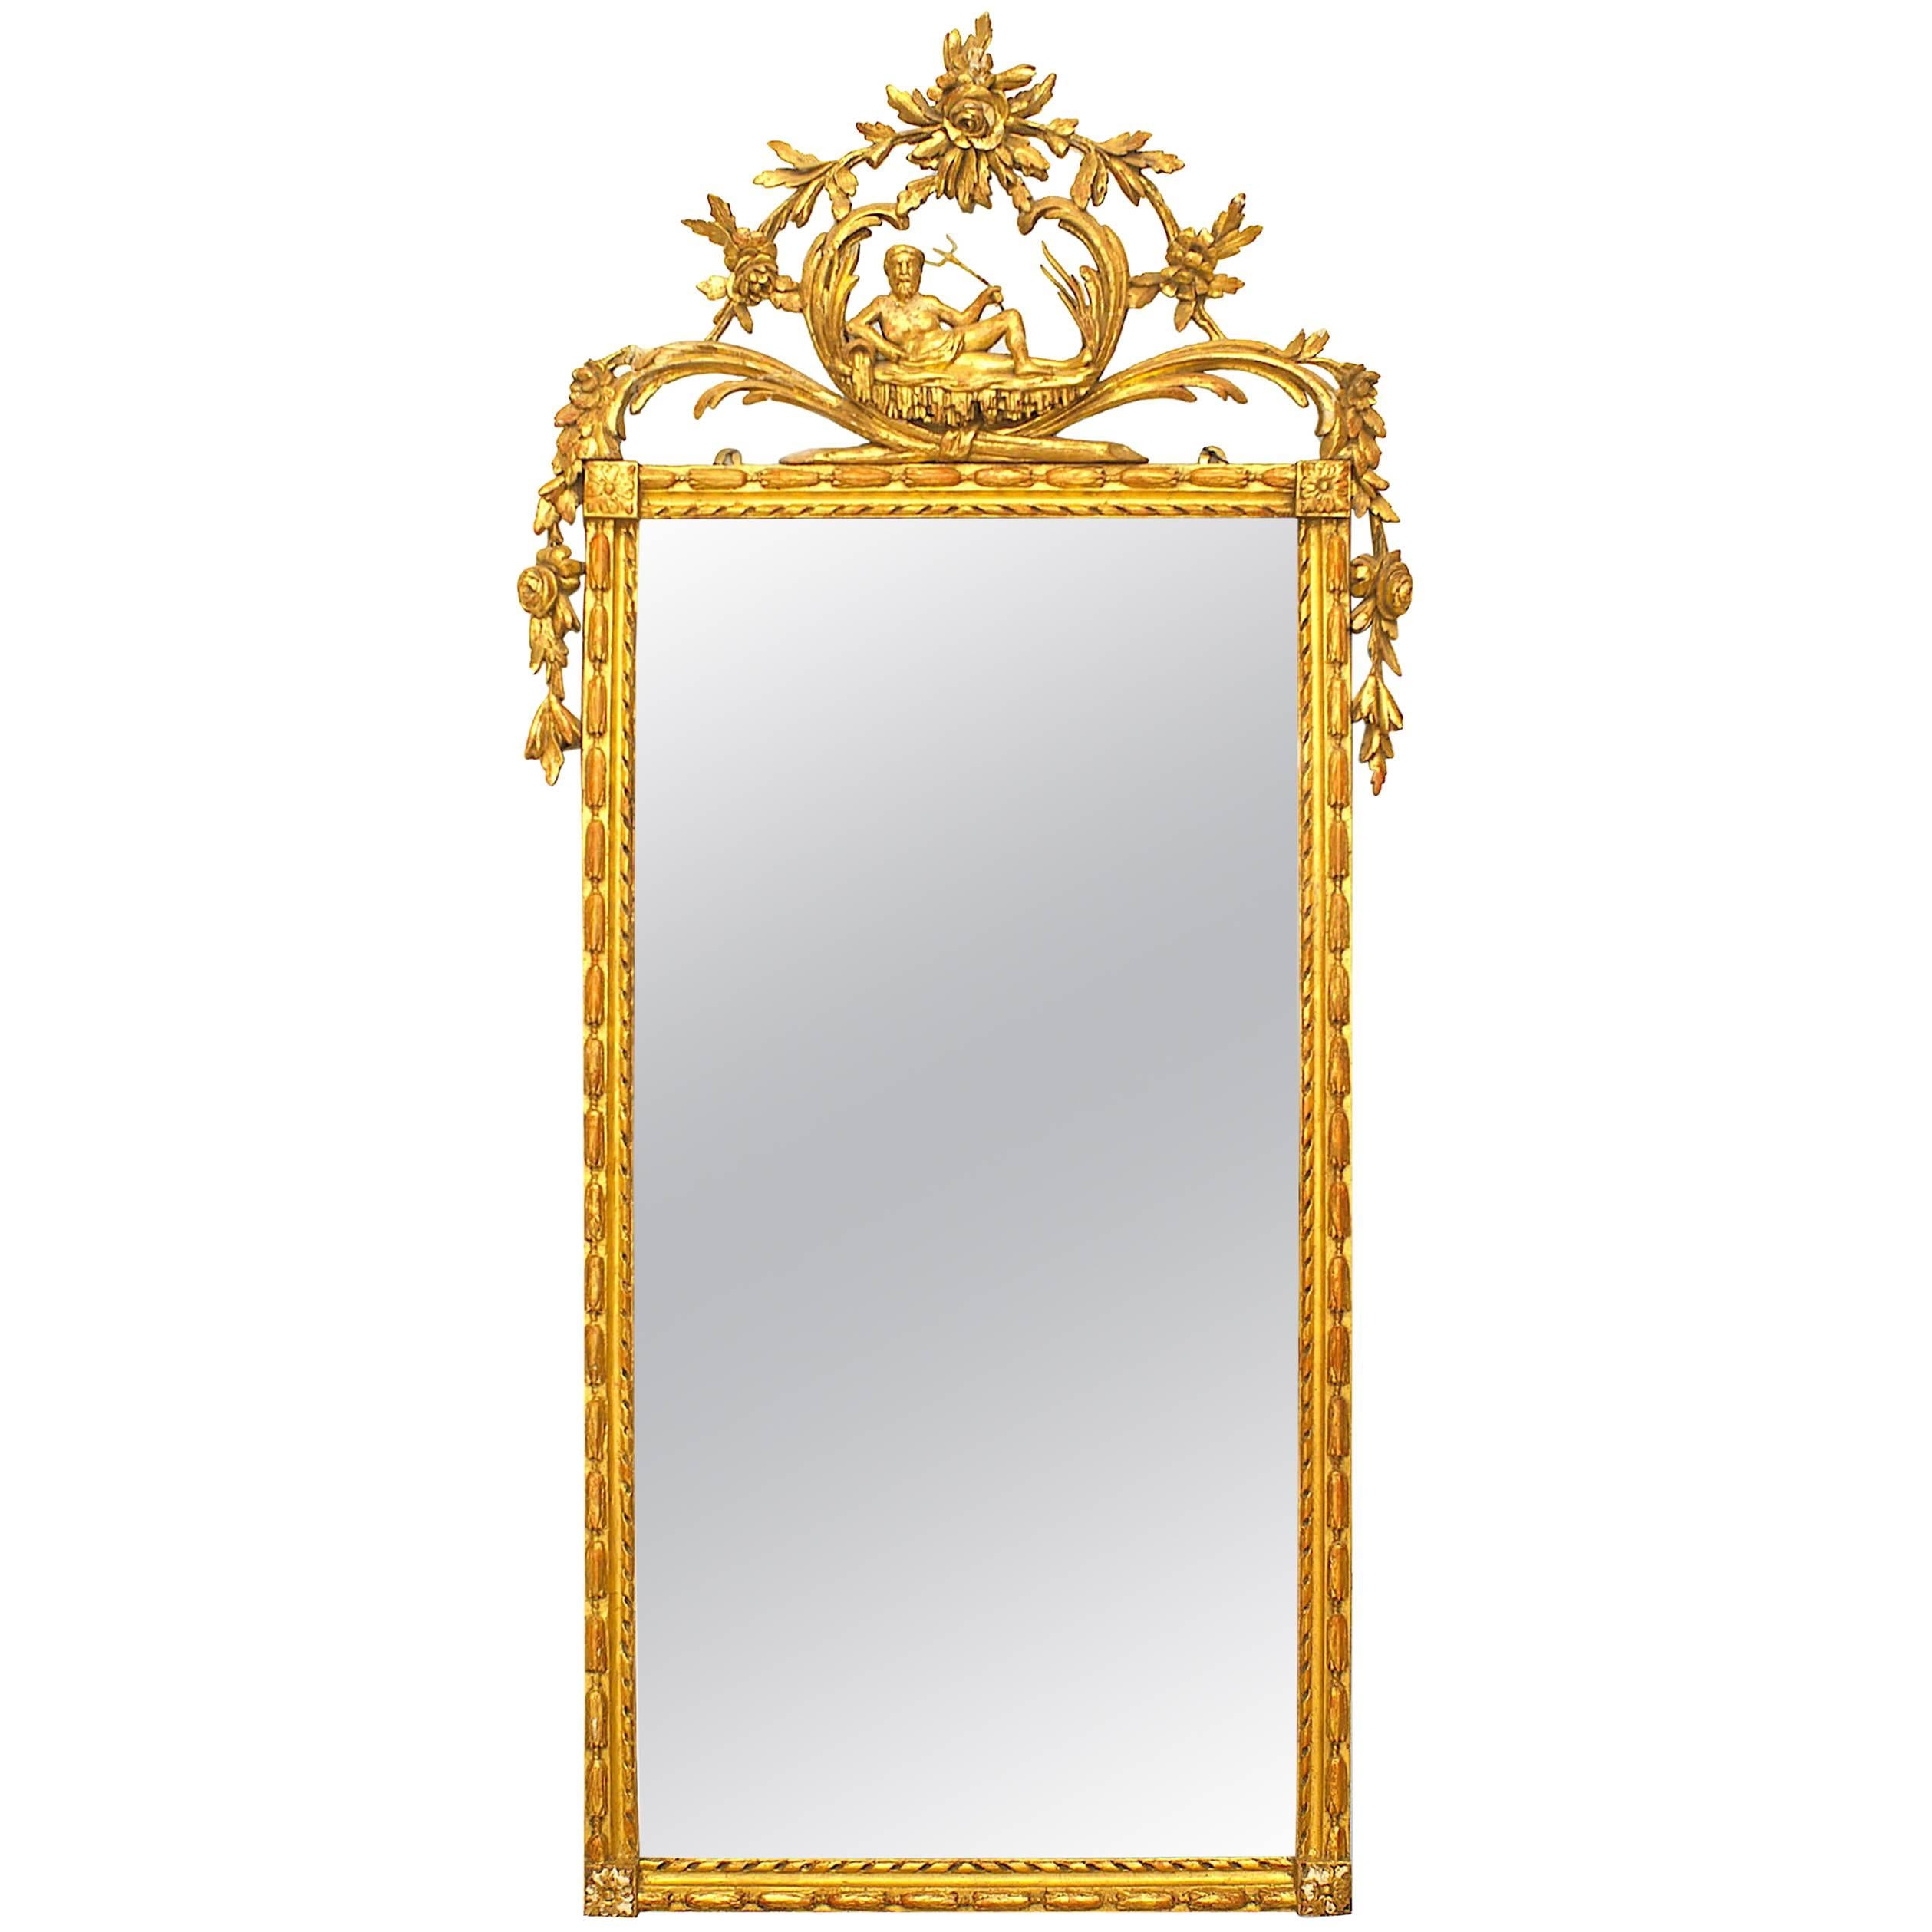 Italian Neoclassic Carved Giltwood Vertical Mirror 'Late 18th Century'